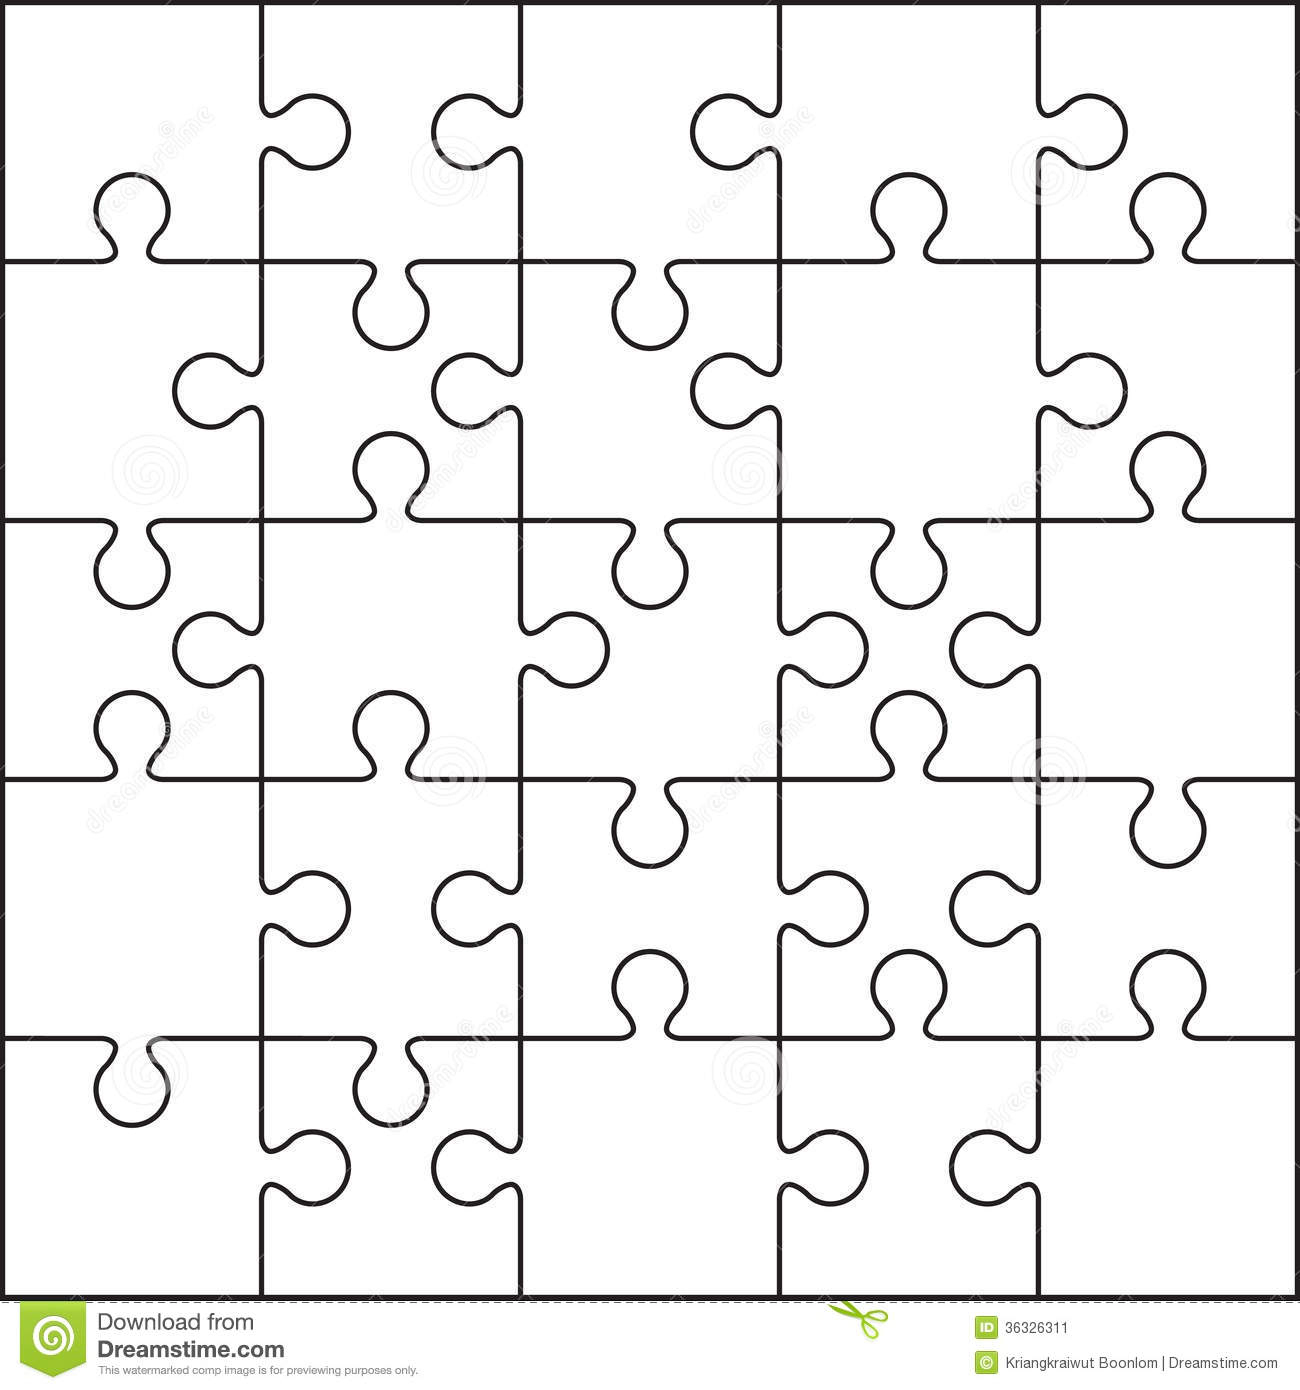 25 Jigsaw Puzzle Blank Template Stock Illustration - Illustration Of - Printable Blank Jigsaw Puzzle Outline